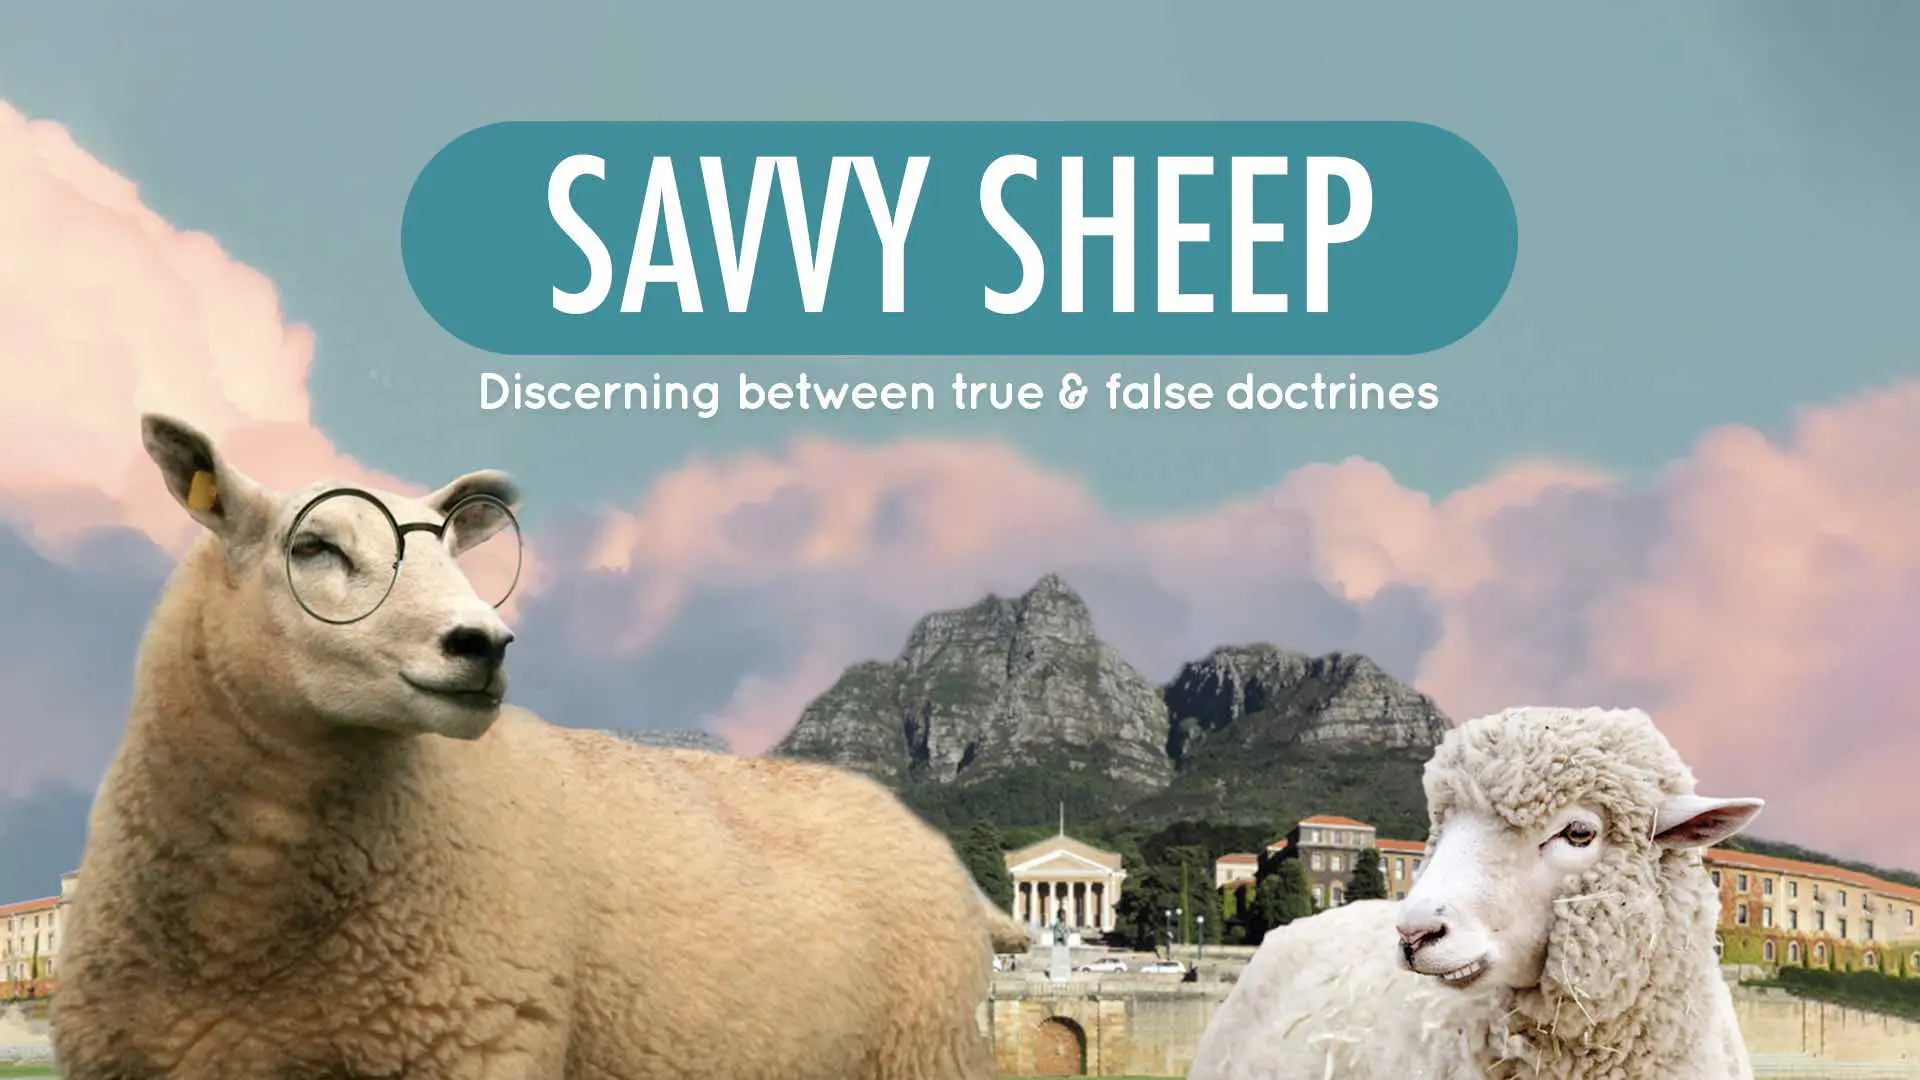 Series image for 'Savvy Sheep' about false teachings